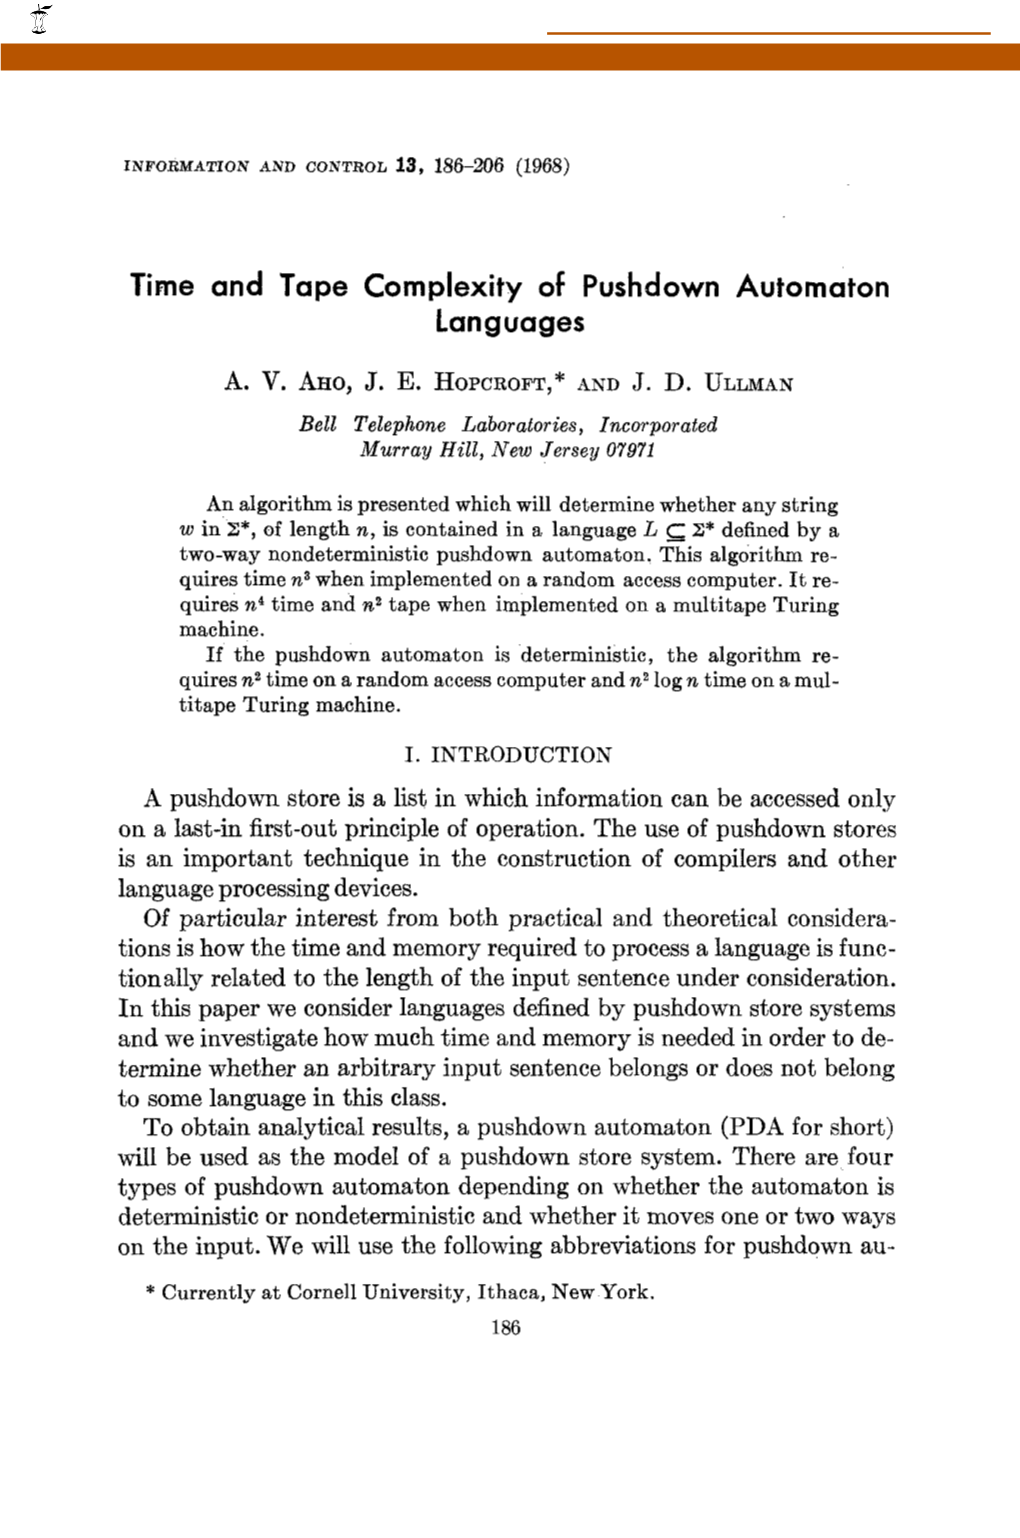 Time and Tape Complexity of Pushdown Automaton Languages